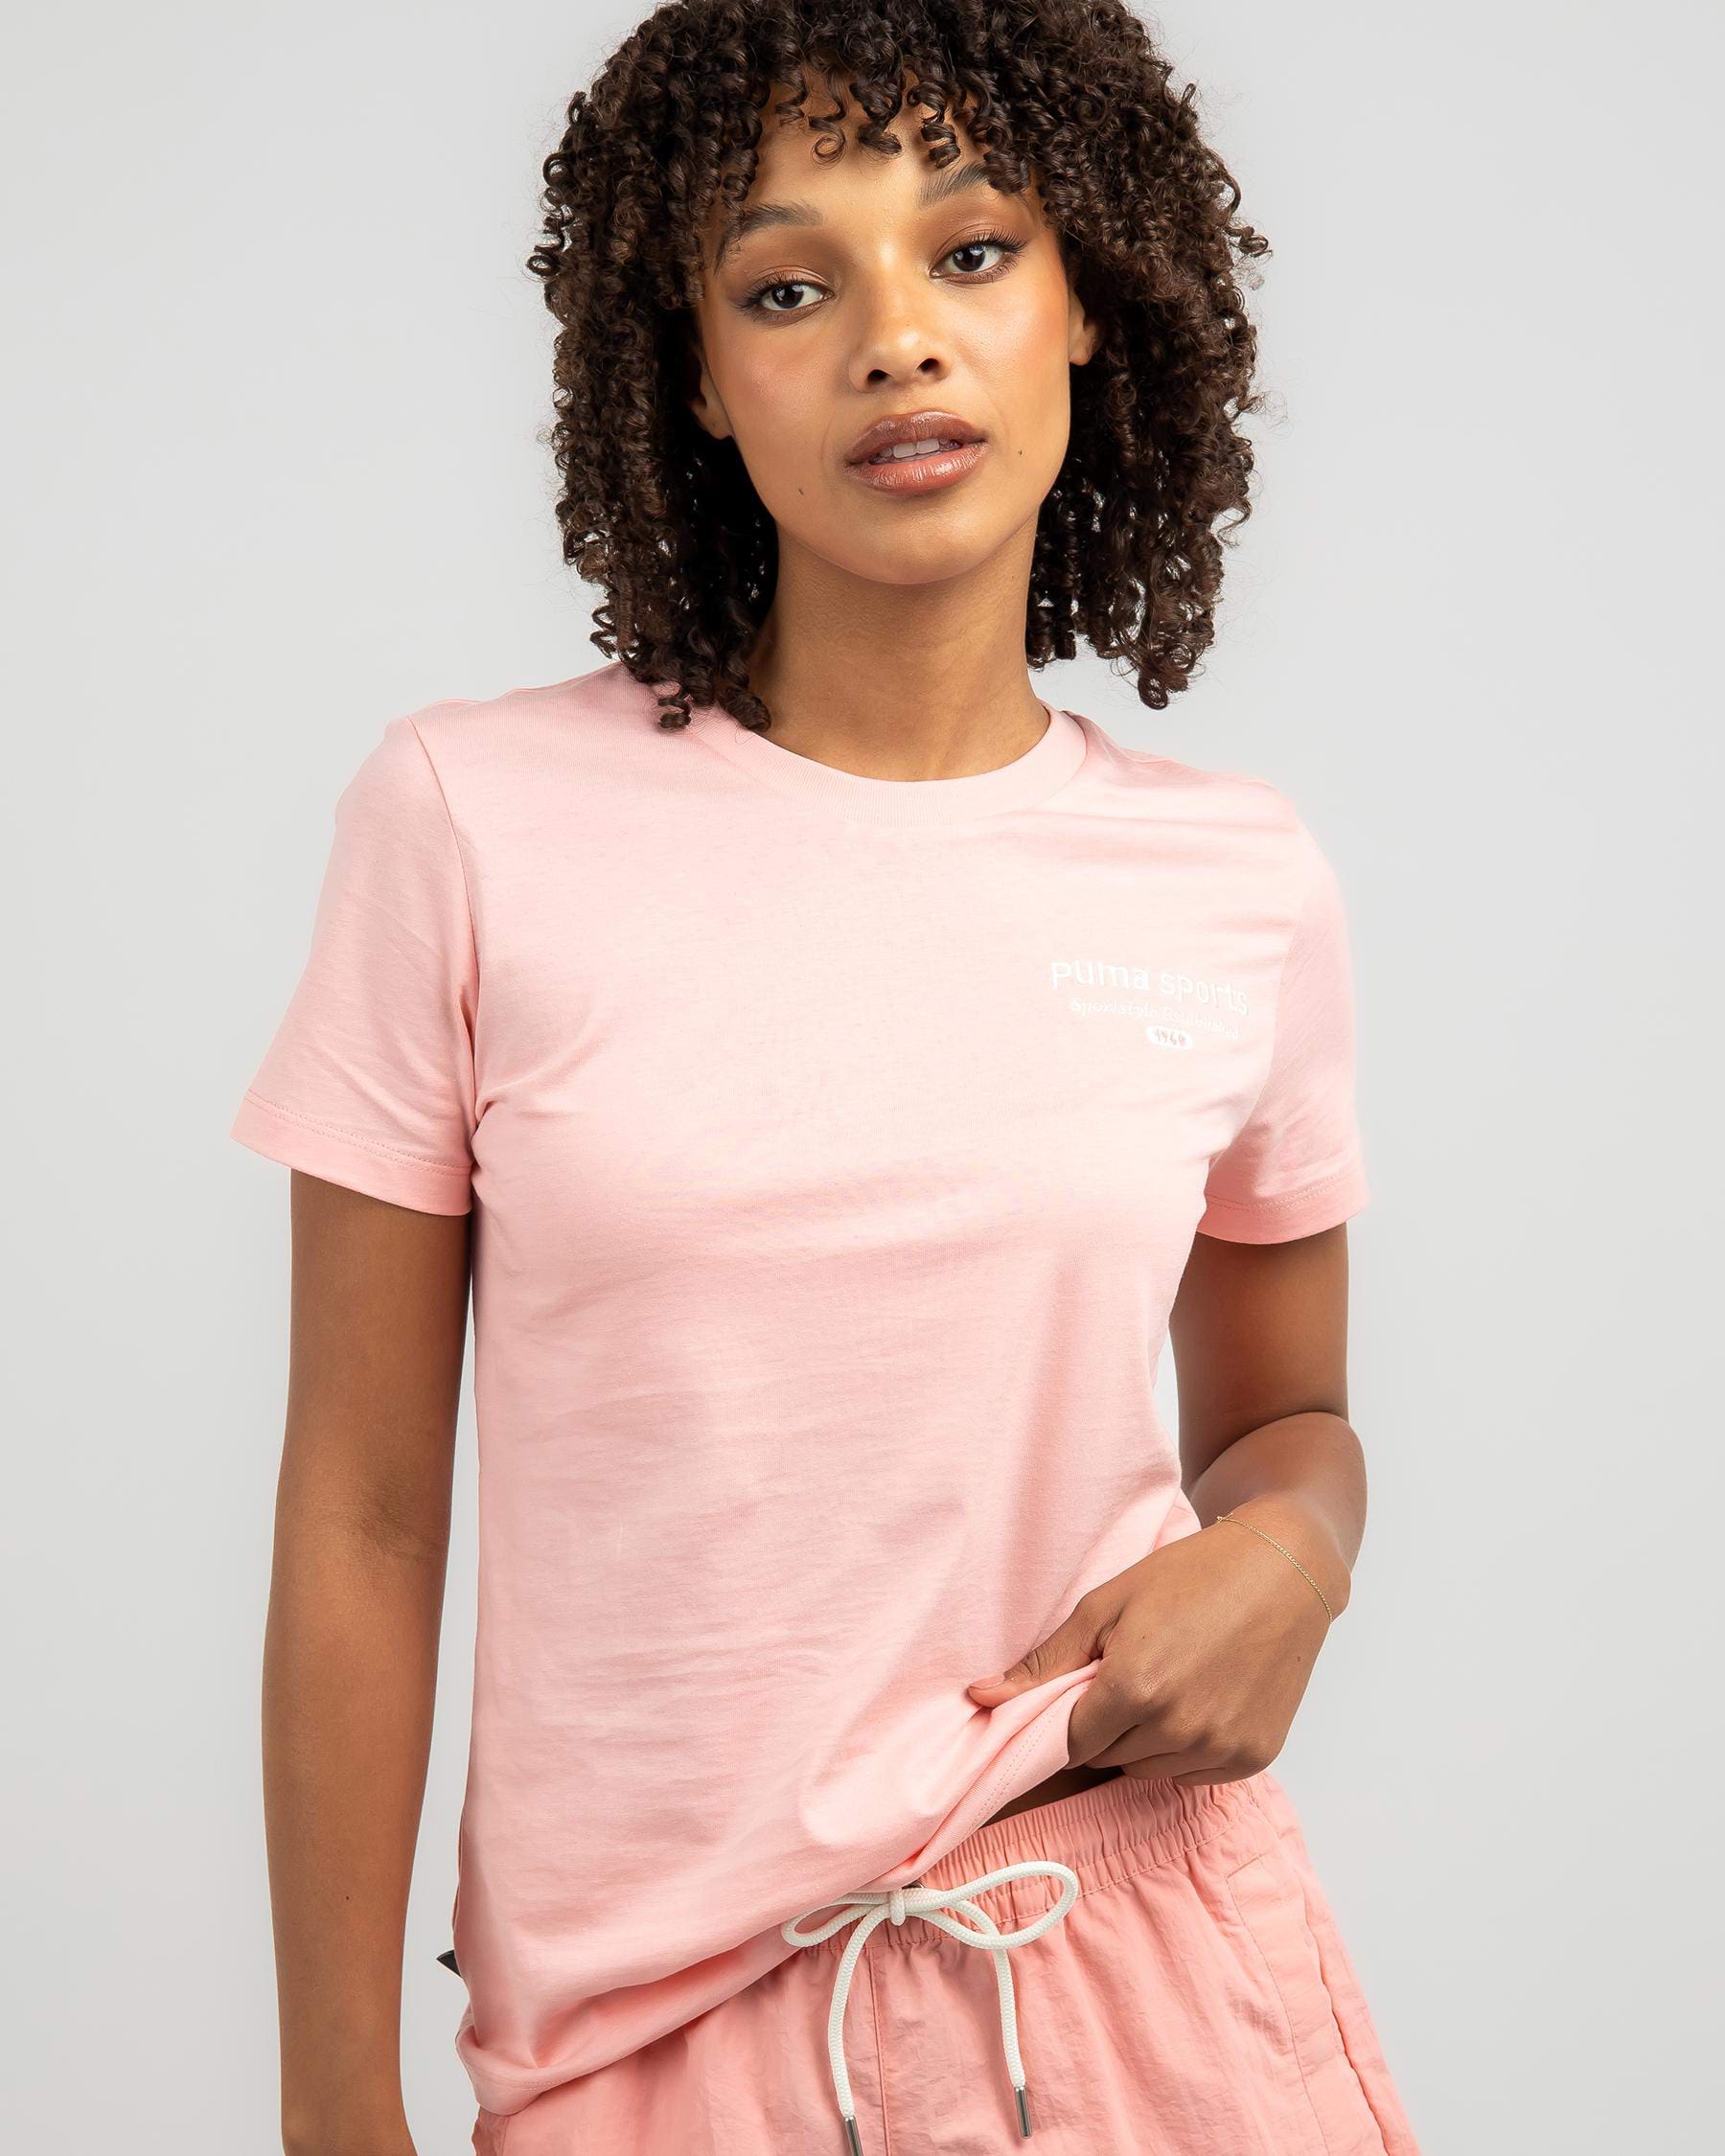 Puma Team Graphic T-Shirt In Peach Smoothie - FREE* Shipping & Easy Returns  - City Beach United States